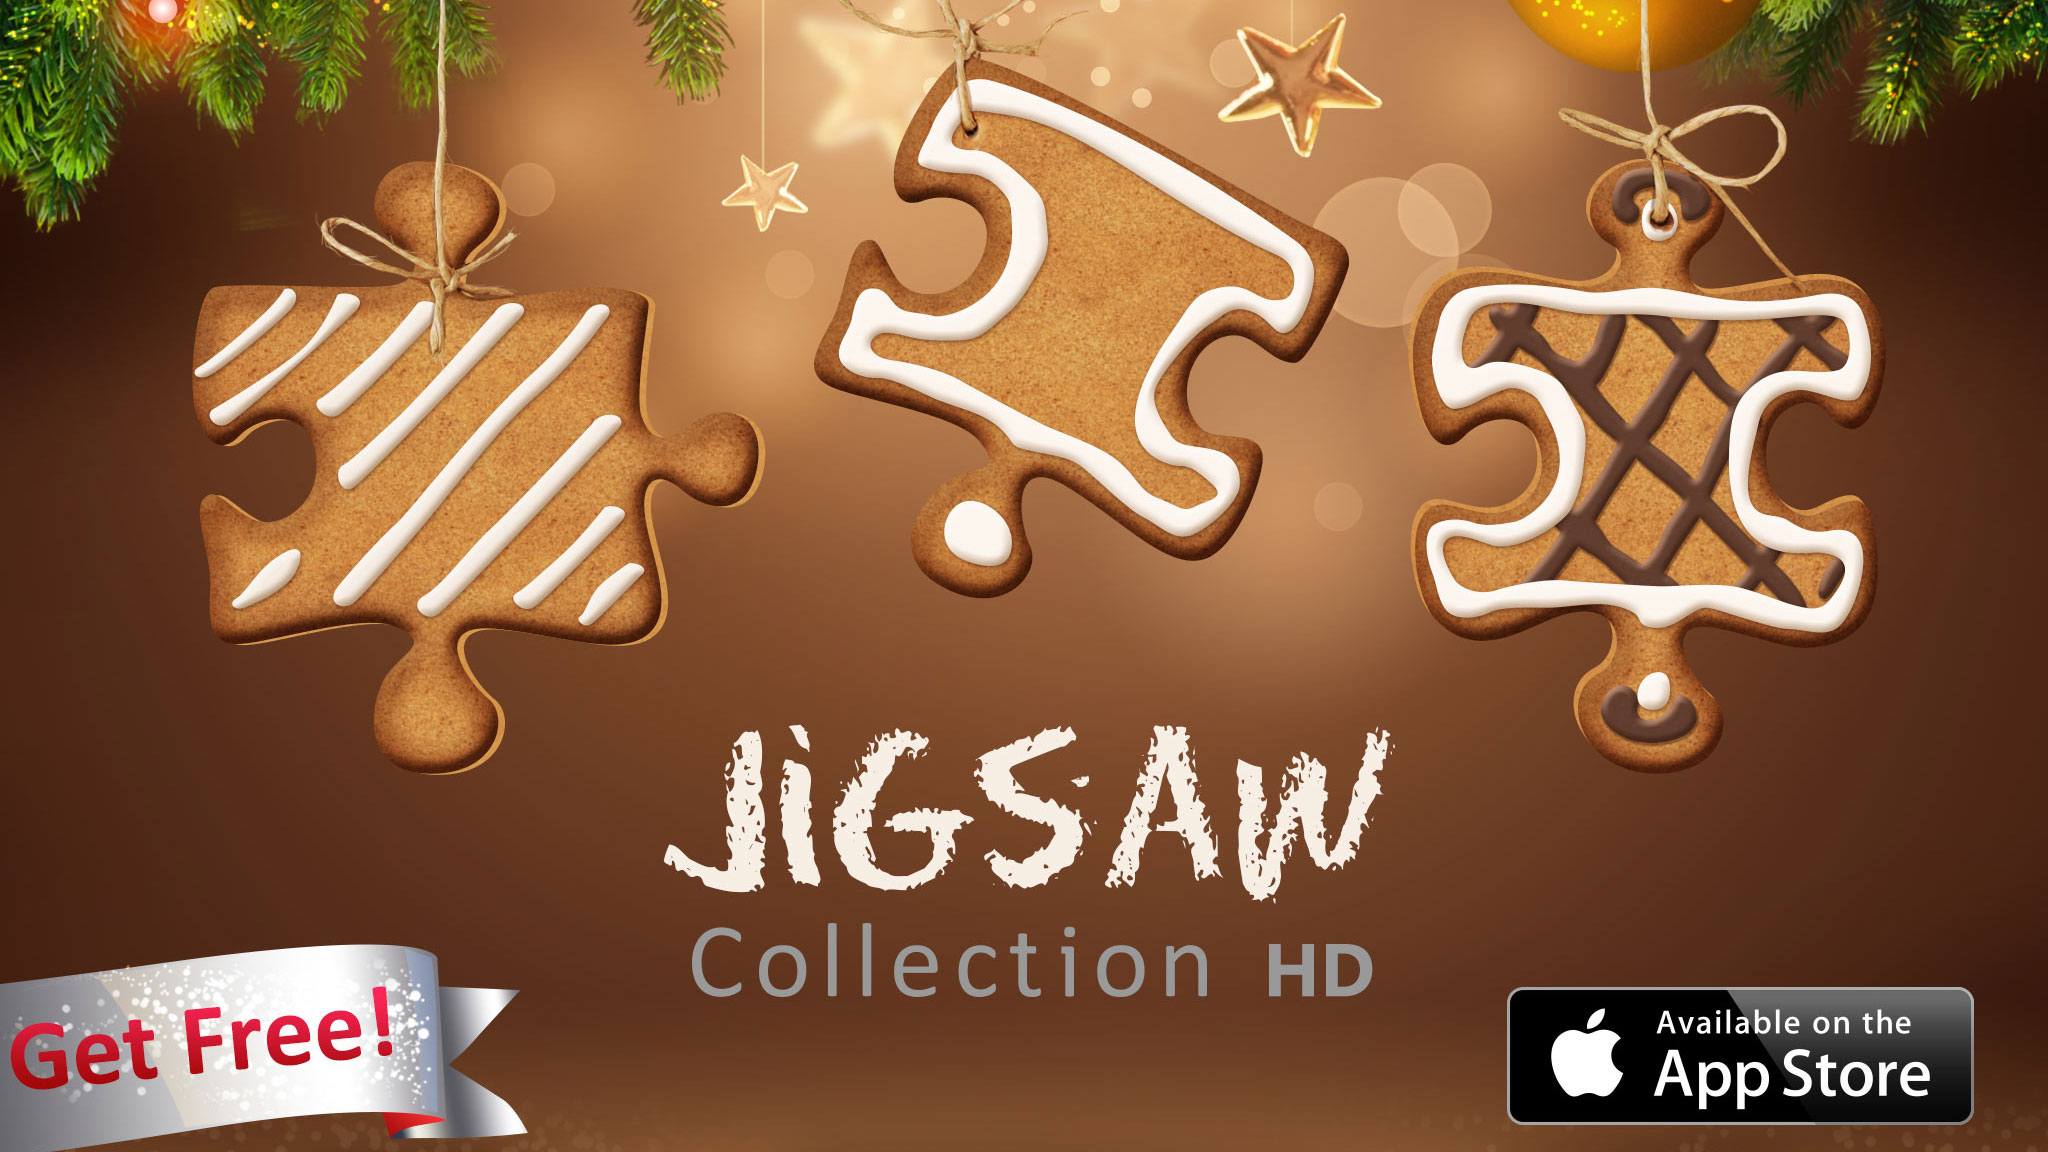 Jigsaw Collection HD Is the Definitive Way to Complete a Jigsaw, and It’s out Now on iPad